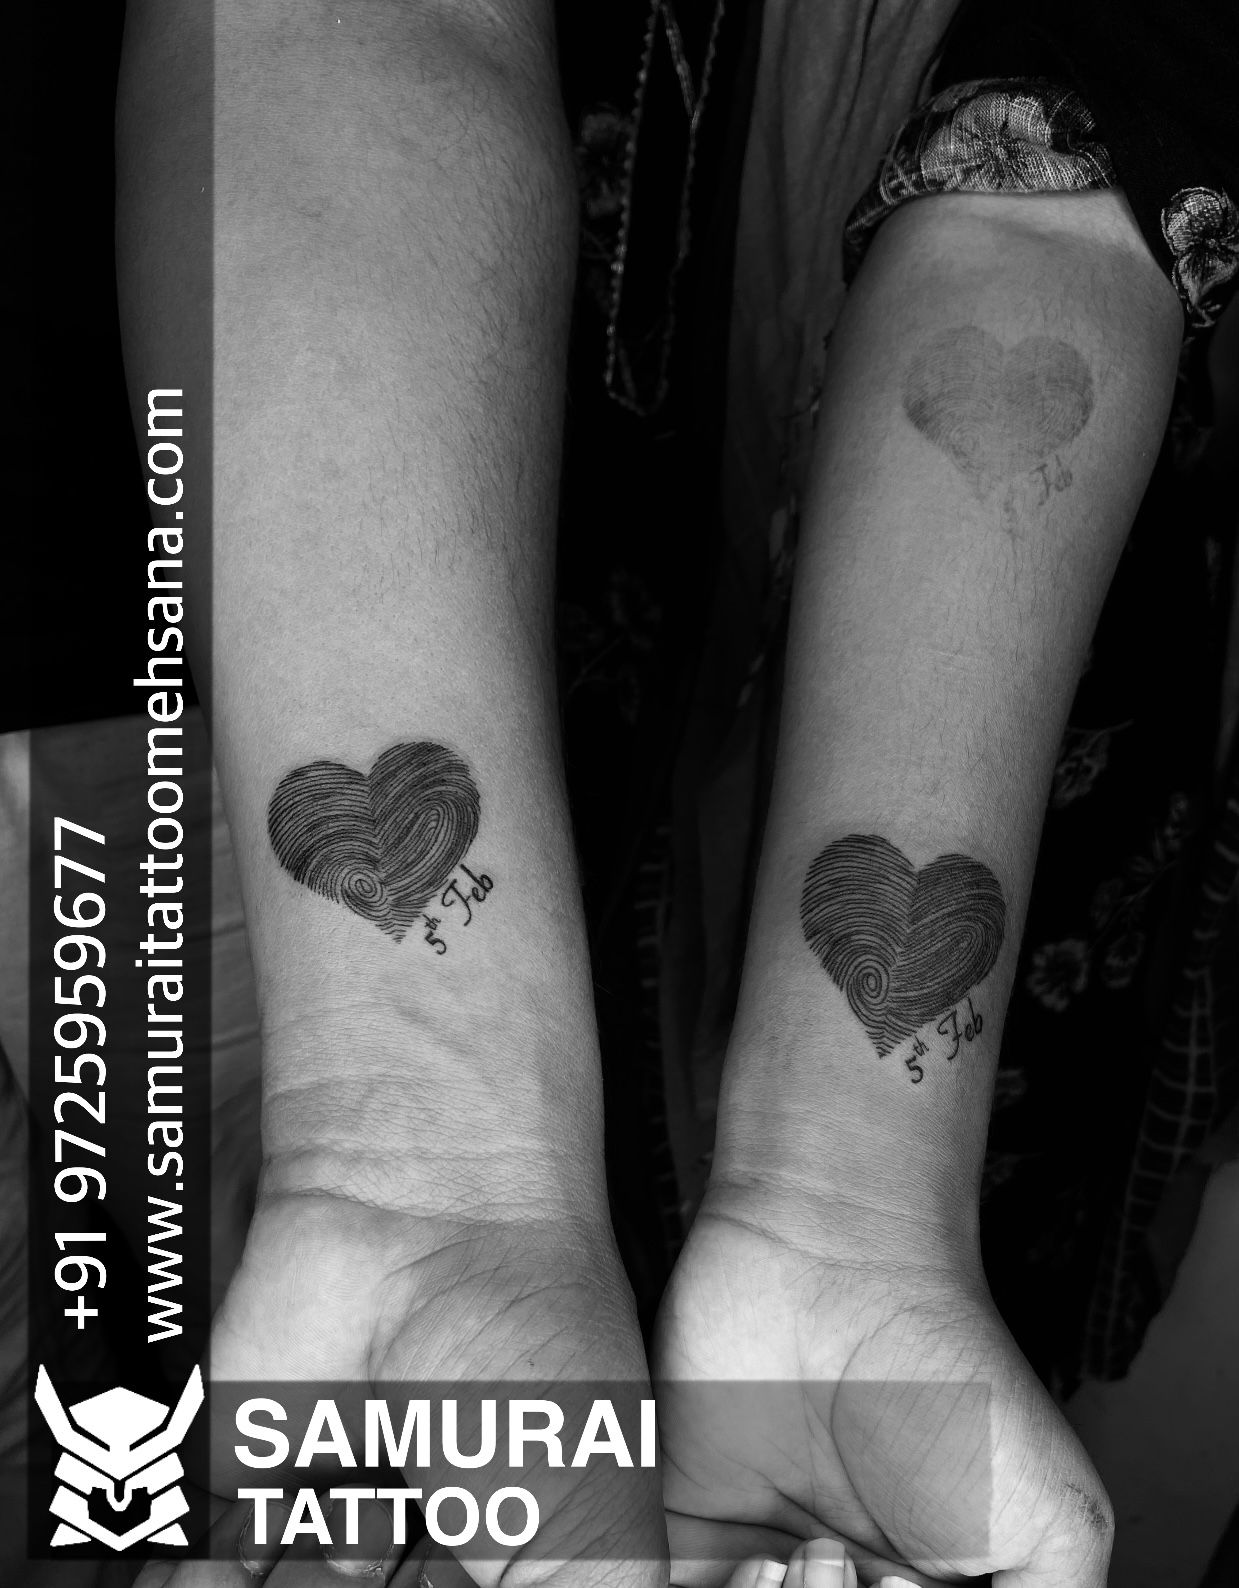 FINGERPRINT COUPLE TATTOOS  FINGERPRINT COUPLE TATTOOS A never ending  Love Story Want to get this Amazing Couple Tattoo from jhaihocom DM or  Call us on 91 88844 64604  By Jhaiho  Facebook